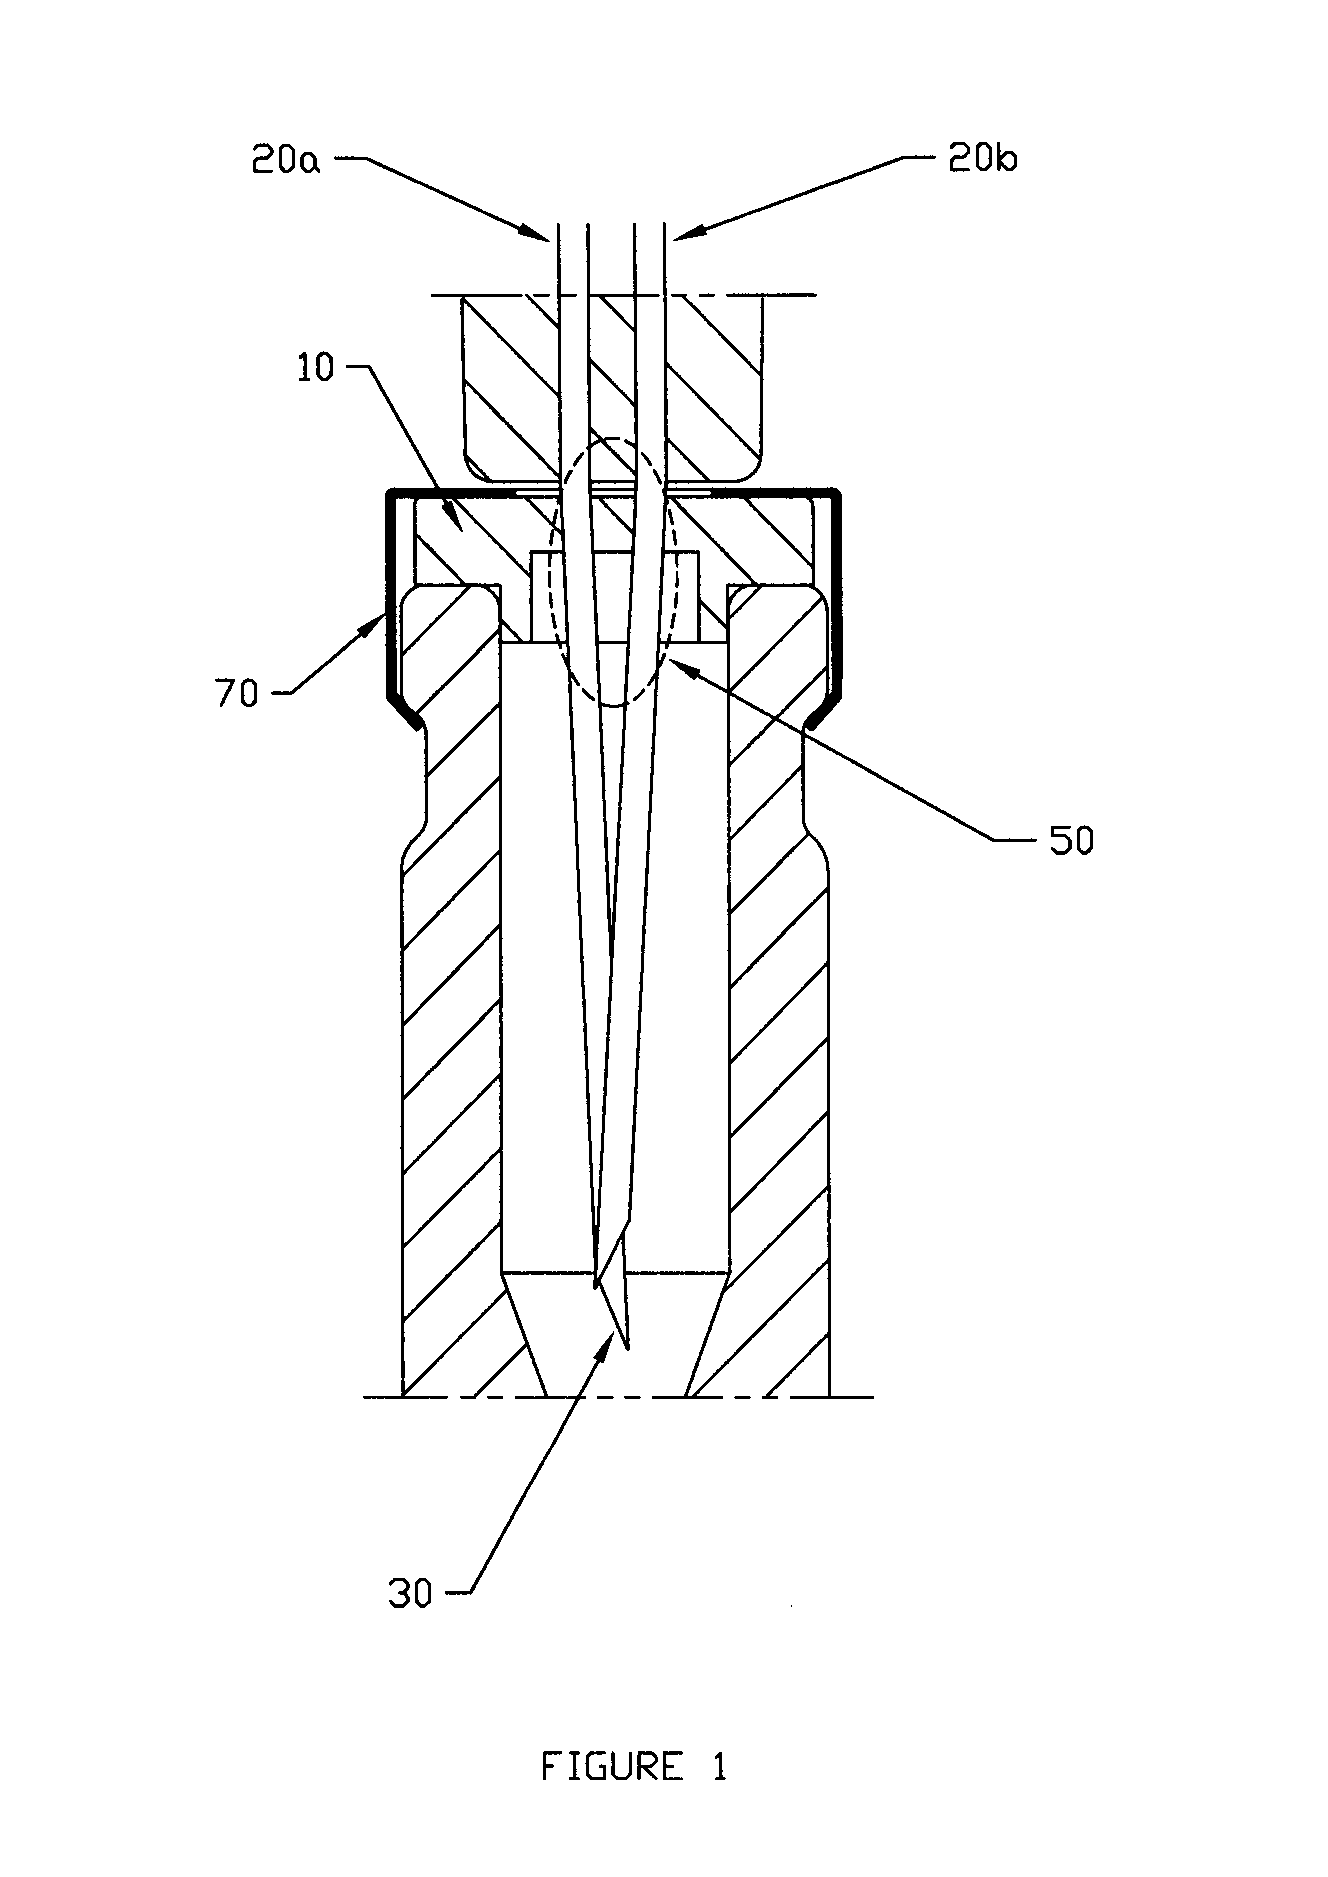 Method for increasing the leakage resistance in a closed, pressurized system comprising a septum-sealed container